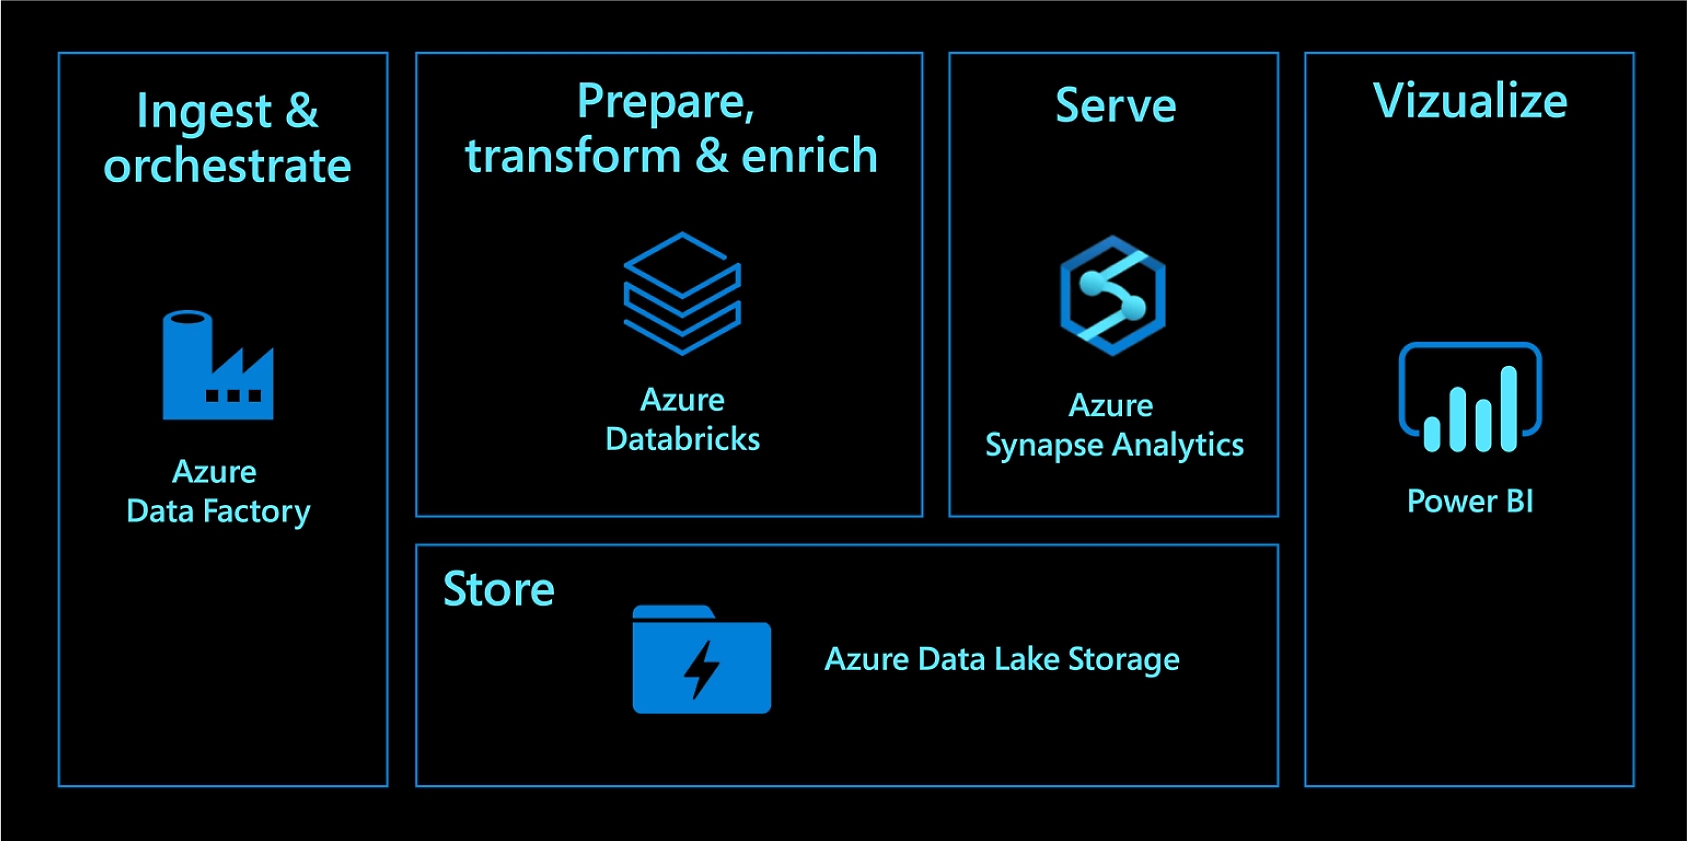 Ingest & orchestrate with Azure Data Factory. Prepare, transform & enrich with Azure Databricks. Serve with Azure Synapse Analytics. Store with Azure Data Lake Storage. Visualize with Power BI.